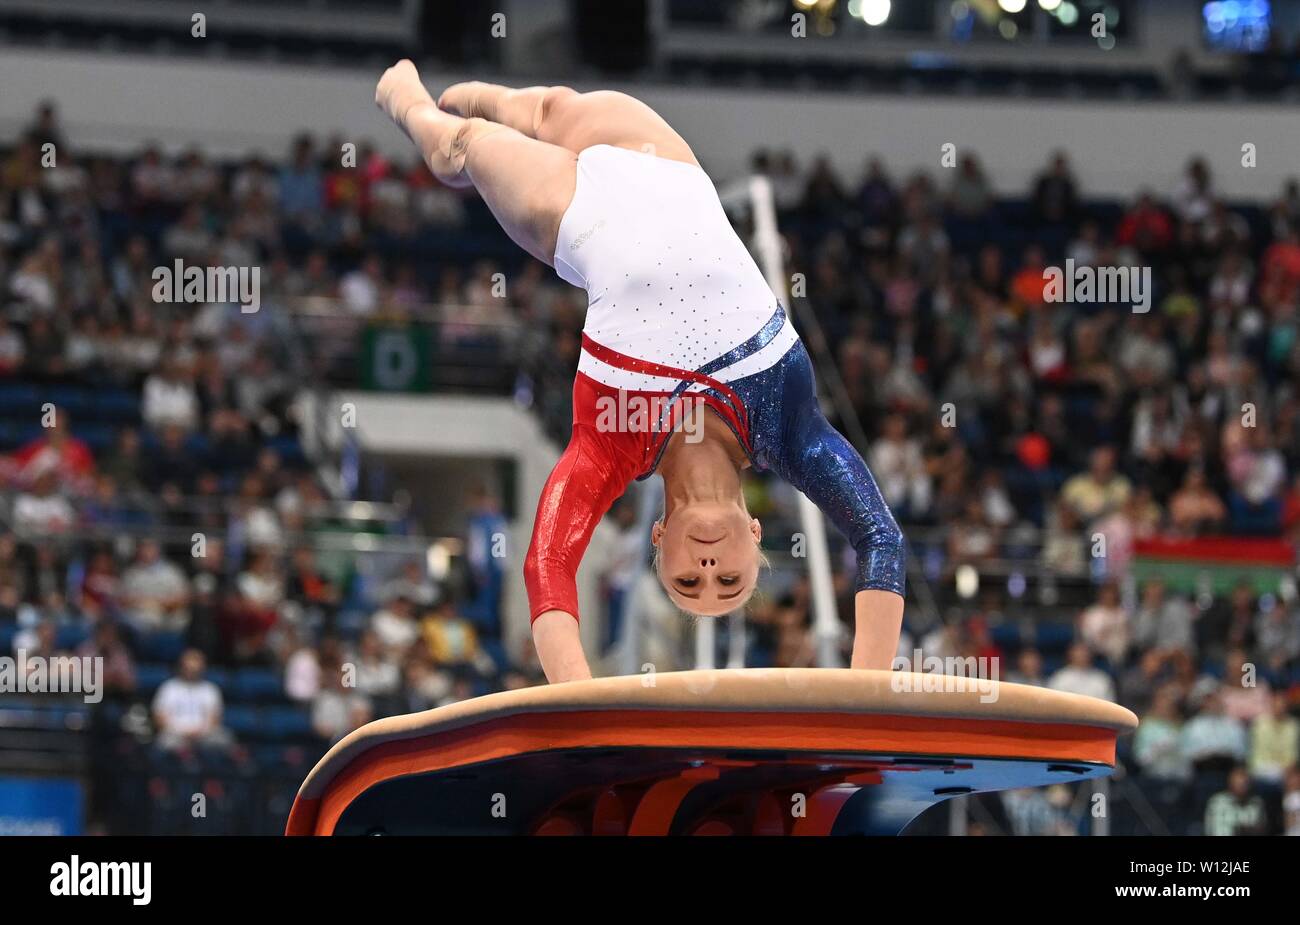 Minsk. Belarus. 29 June 2019. Angelina Melinikova (RUS) during the womens all round final of the Artistic Gymnastics at the 2nd European games. Credit Garry Bowden/SIP photo agency/Alamy live news. Stock Photo